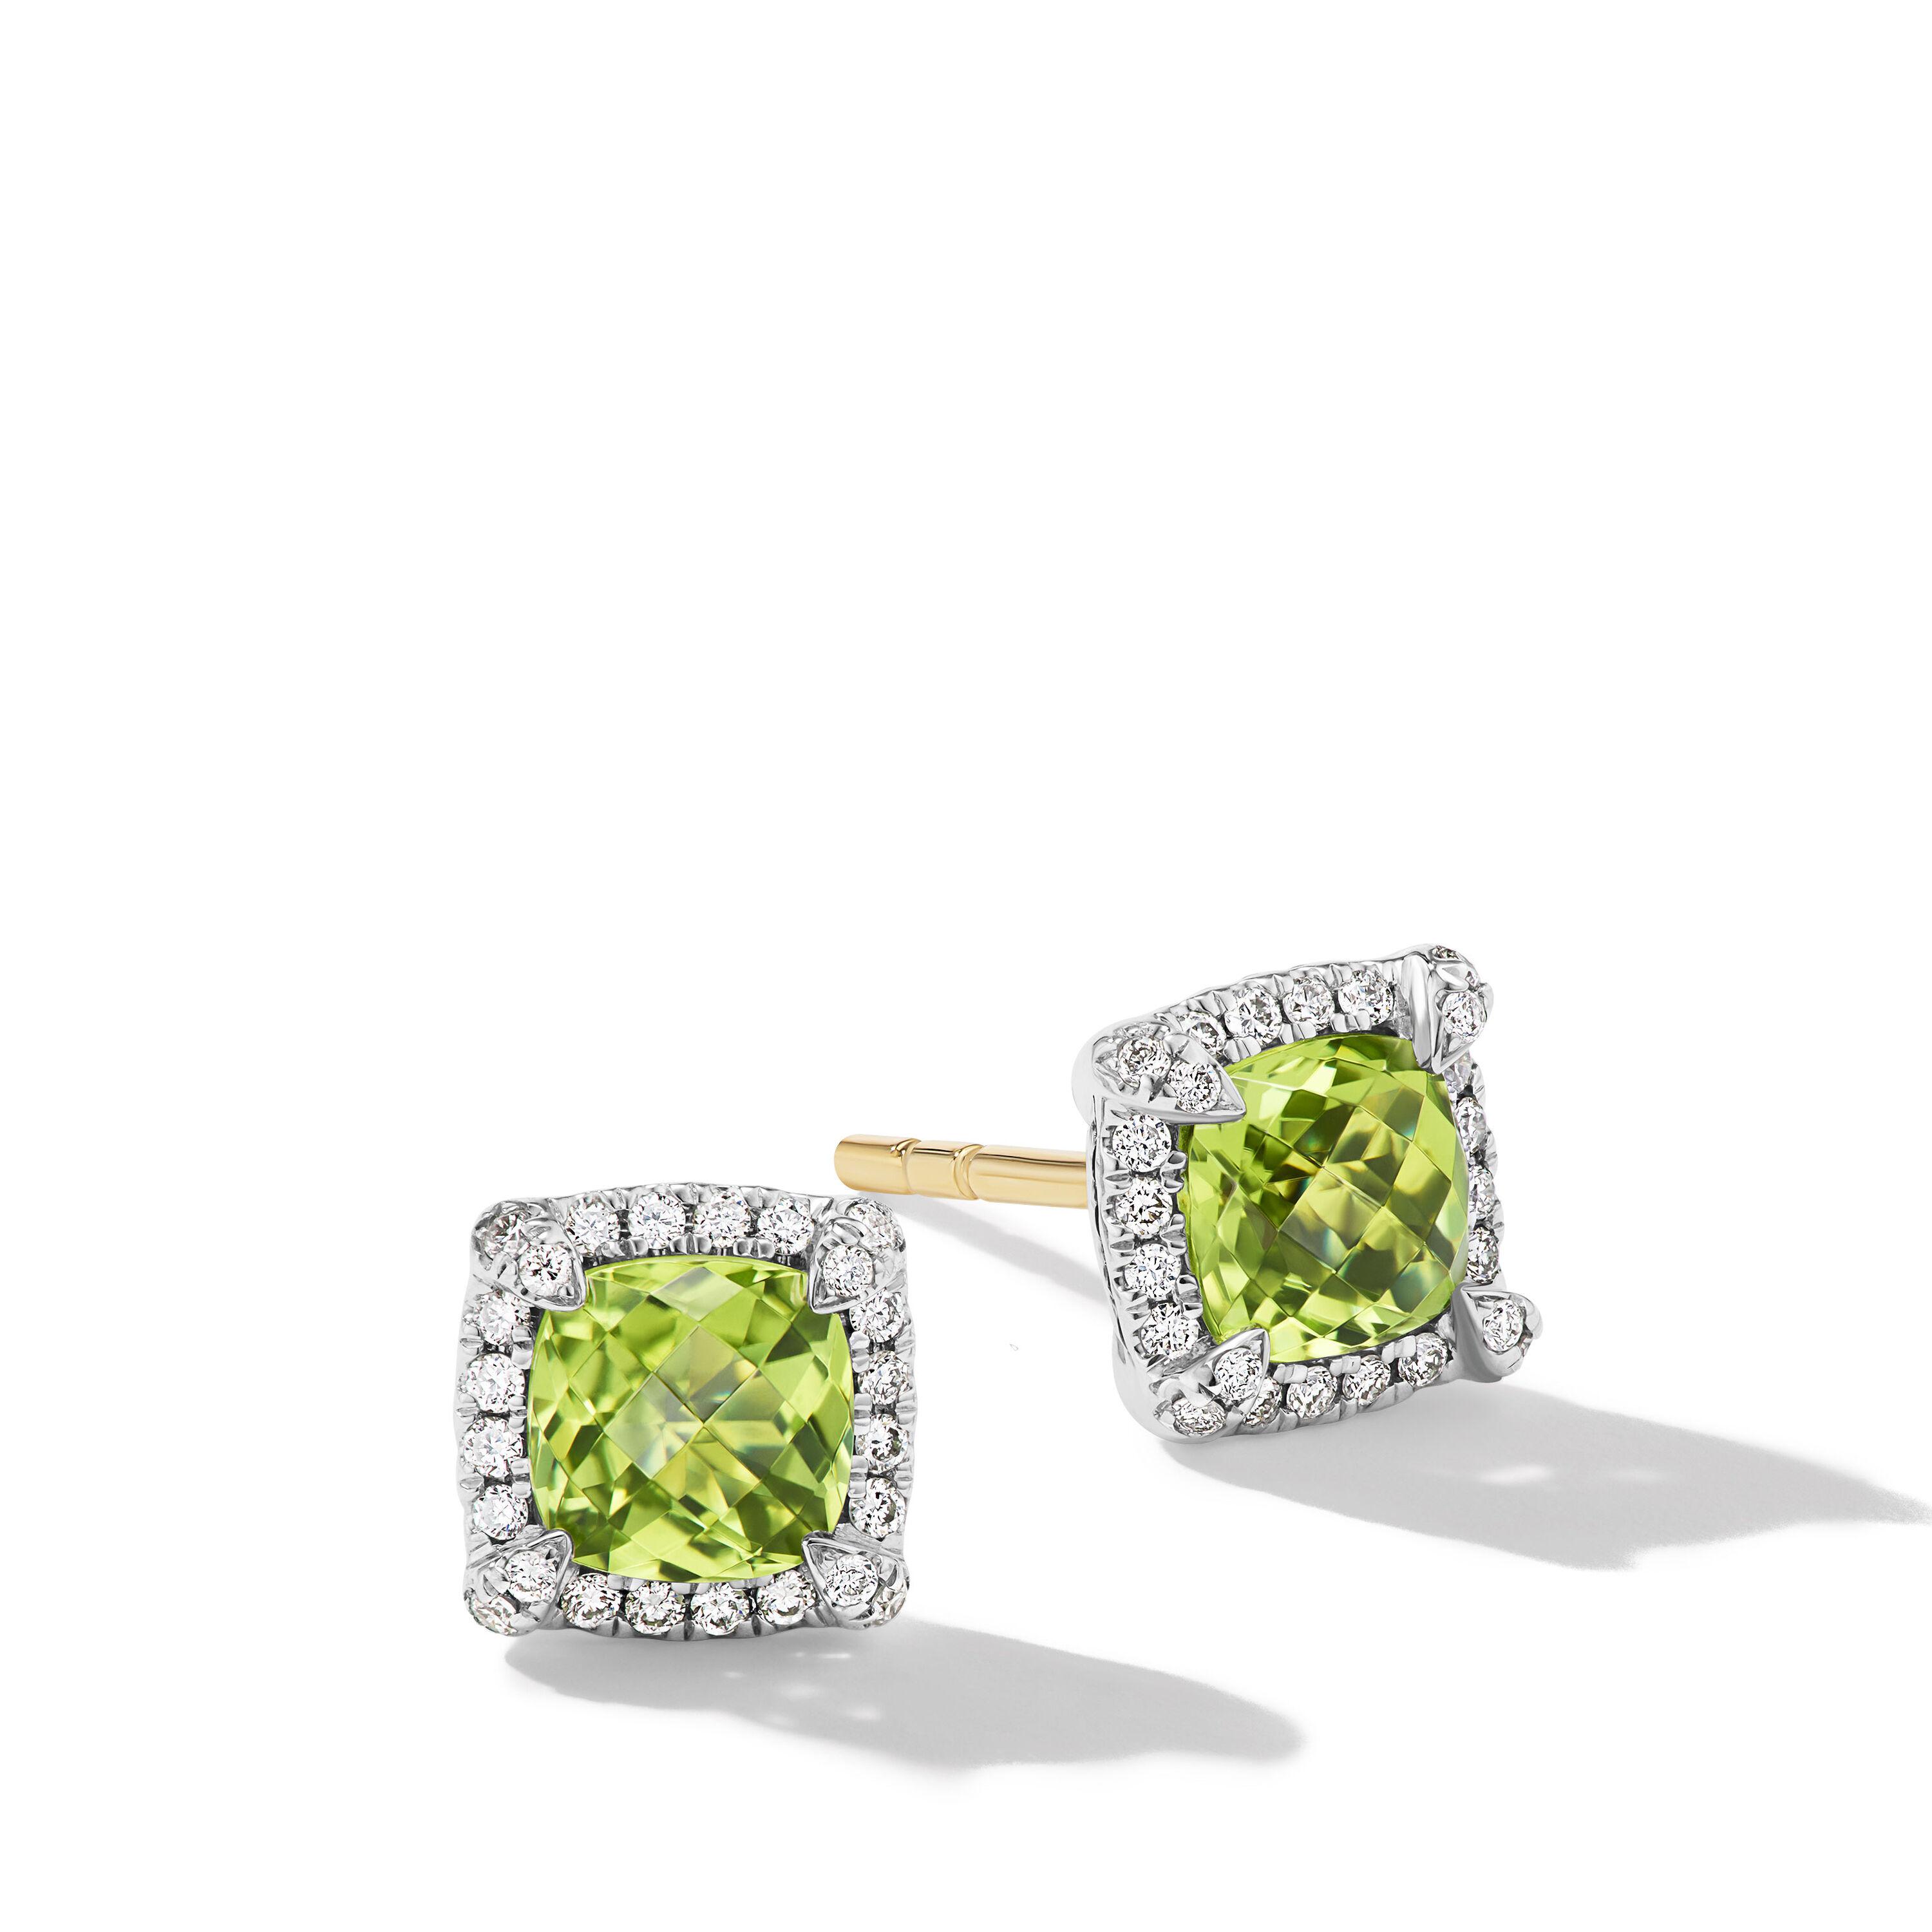 David Yurman Petite Chatelaine Pave Bezel Stud Earrings in Sterling Silver with Peridot and Diamonds 0